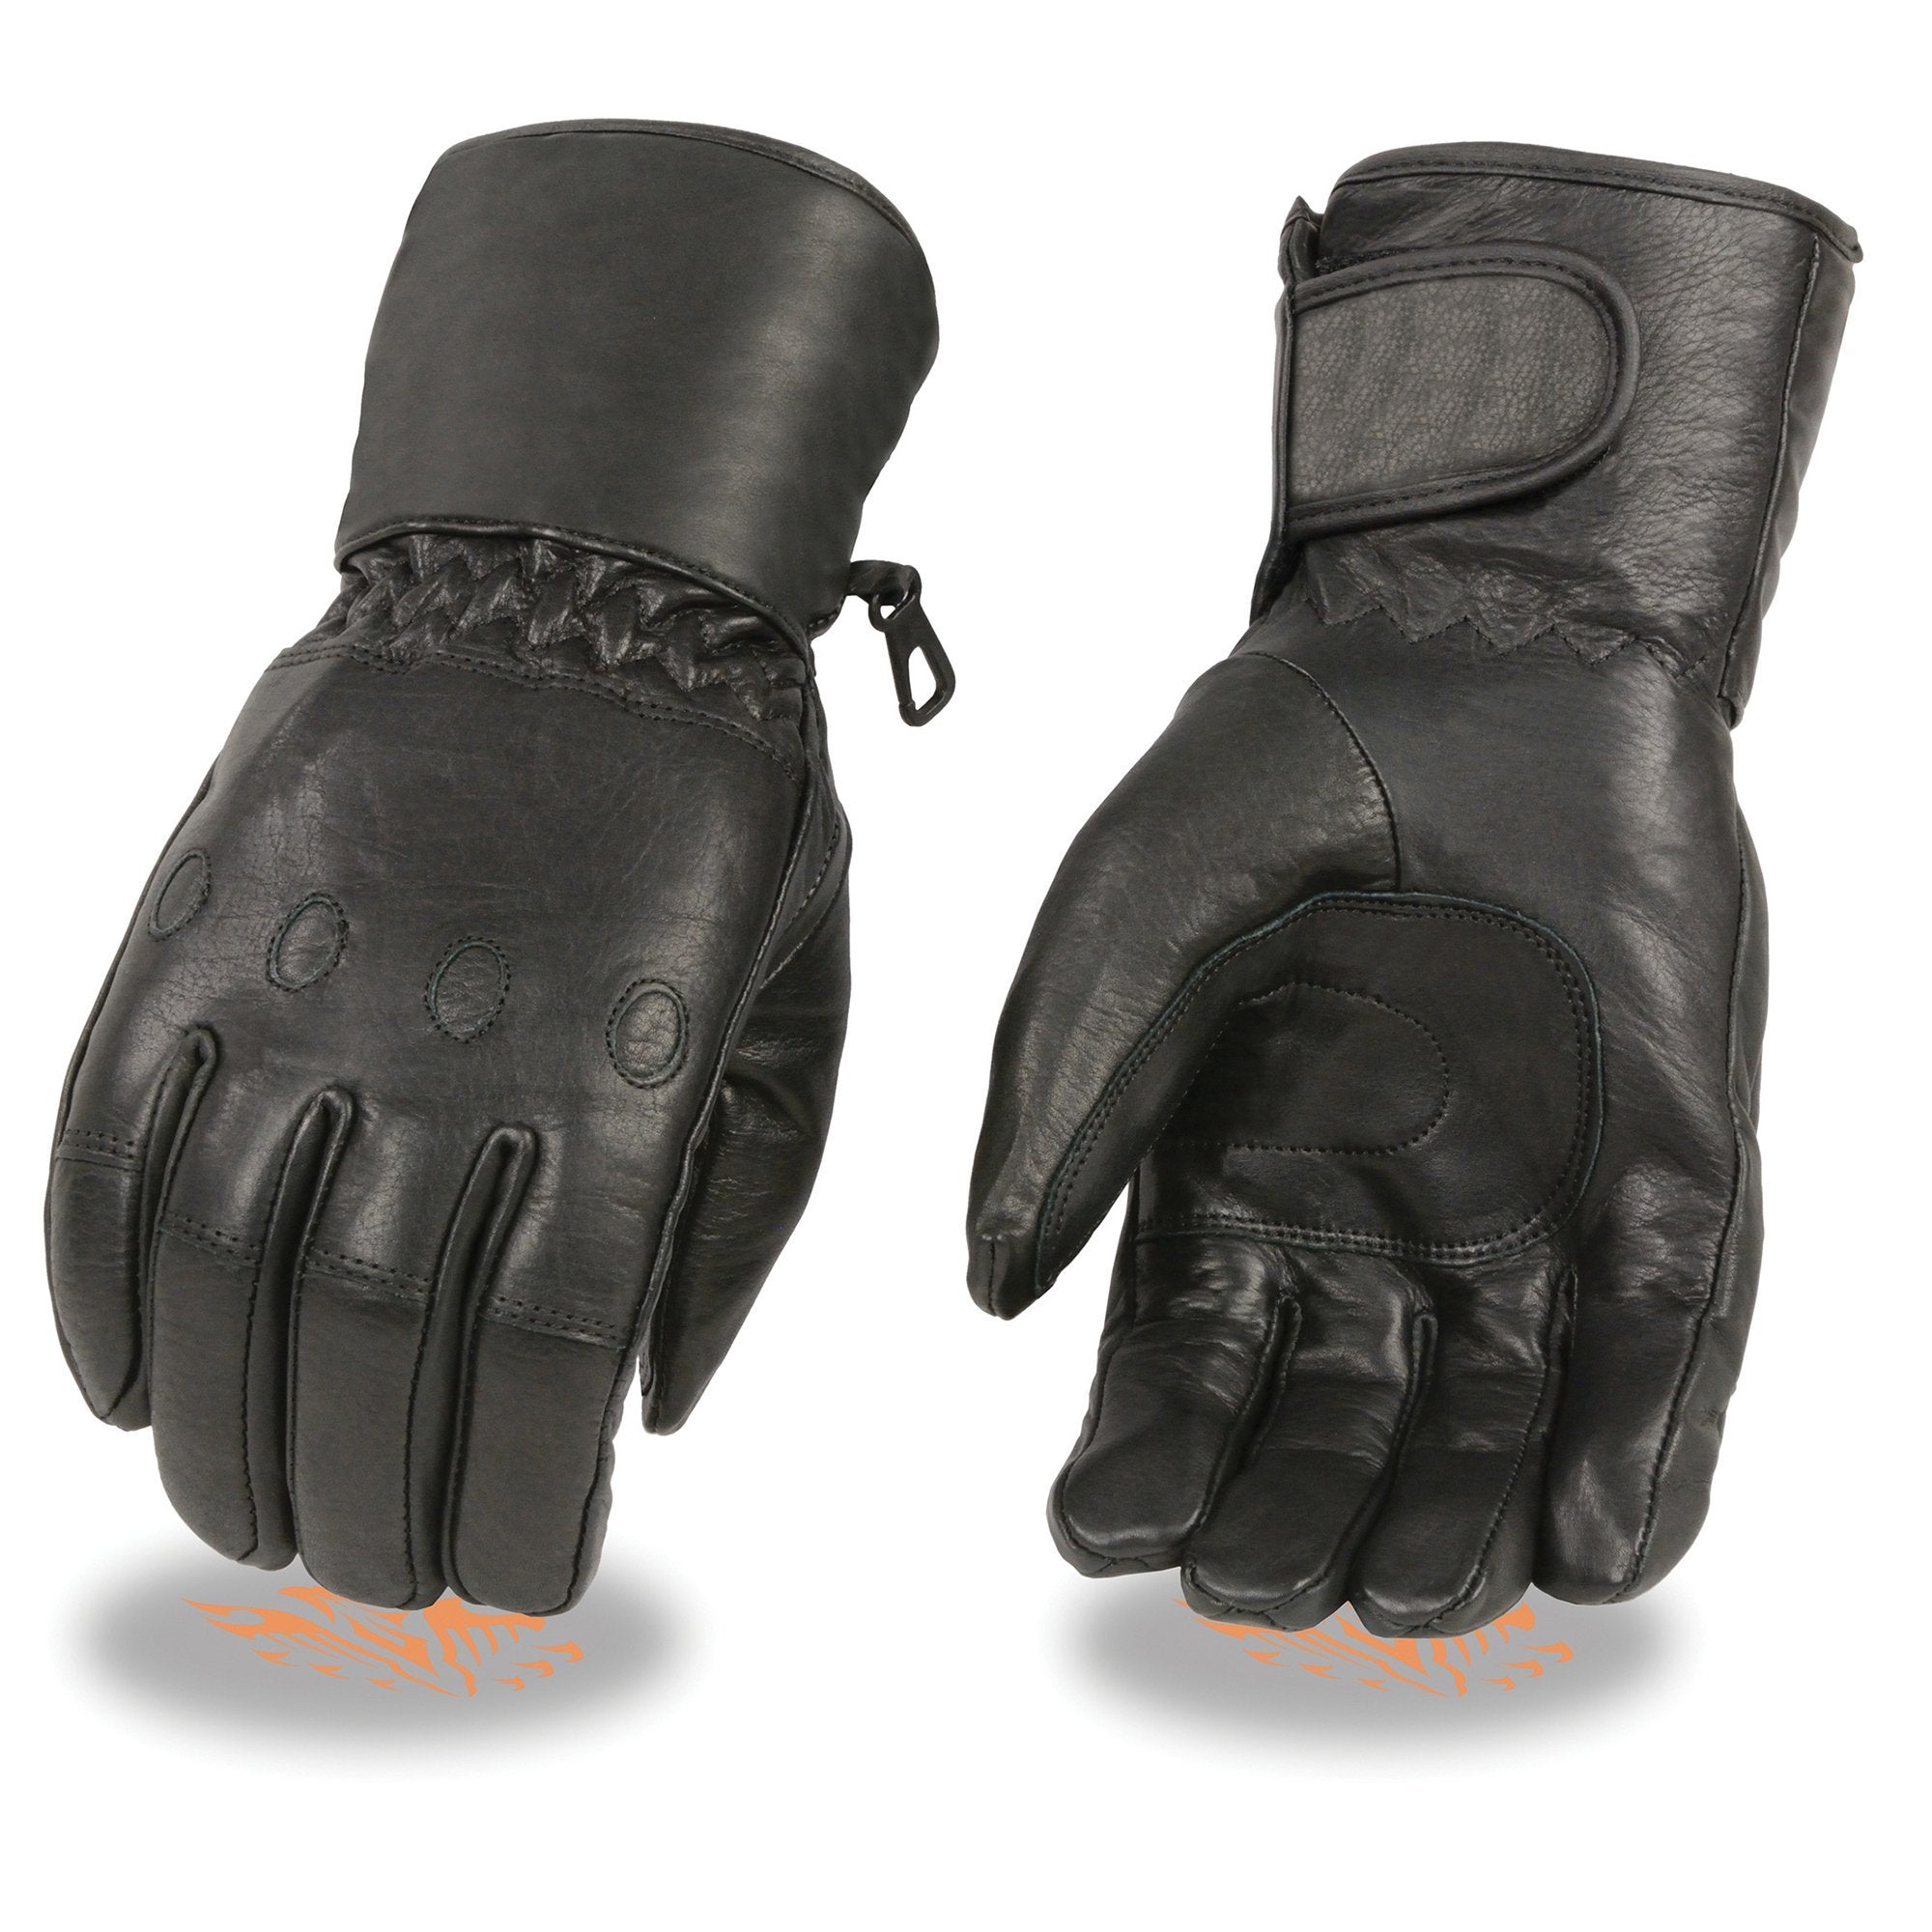 Milwaukee Leather SH293 Men's Black Leather Waterproof Gauntlet Gloves with Cinch Wrist